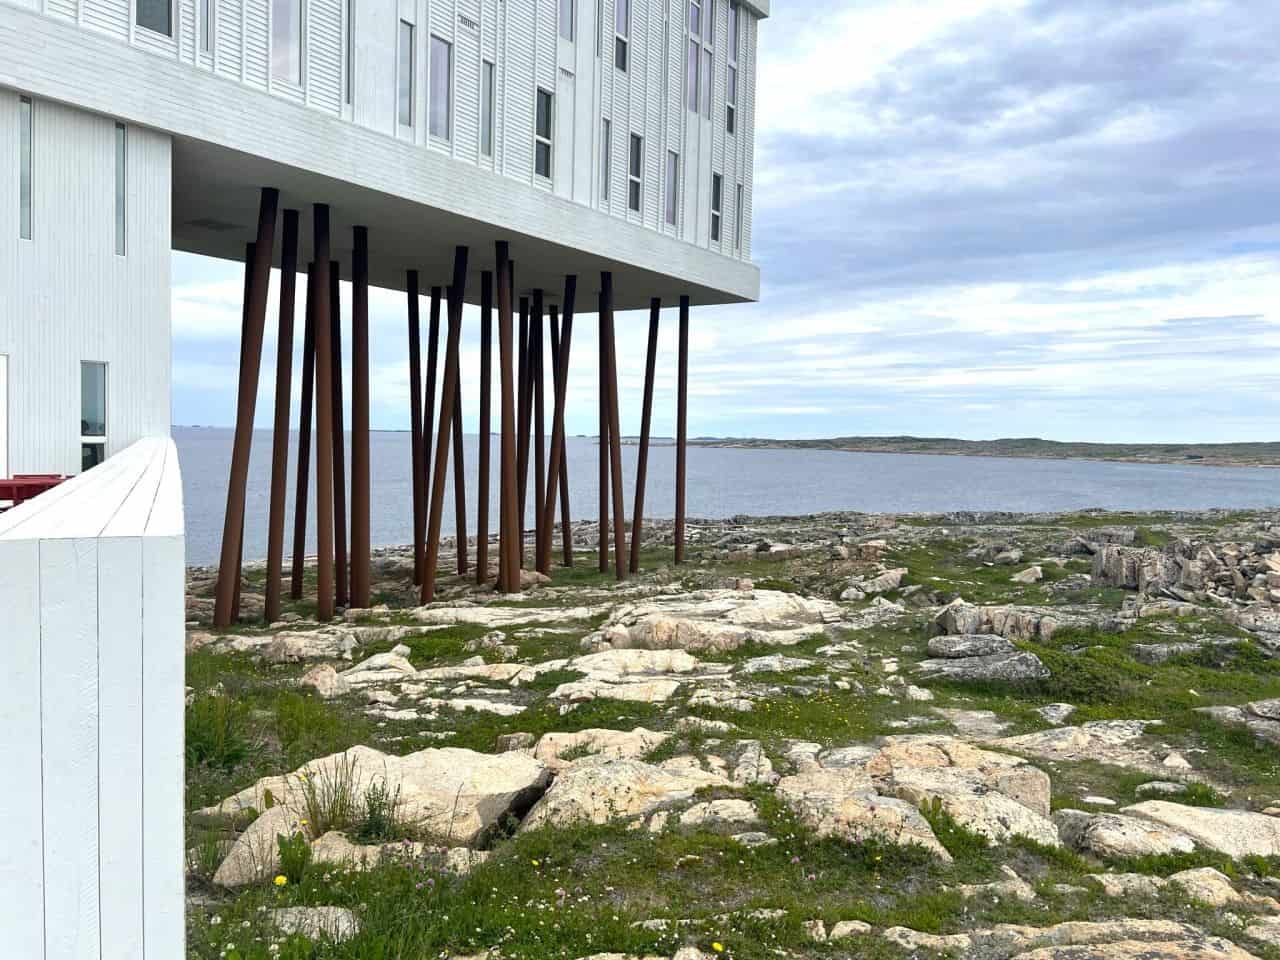 Views of Fogo Island Inn in Newfoundland Canada. One of Newfoundland's most famous accommodations.